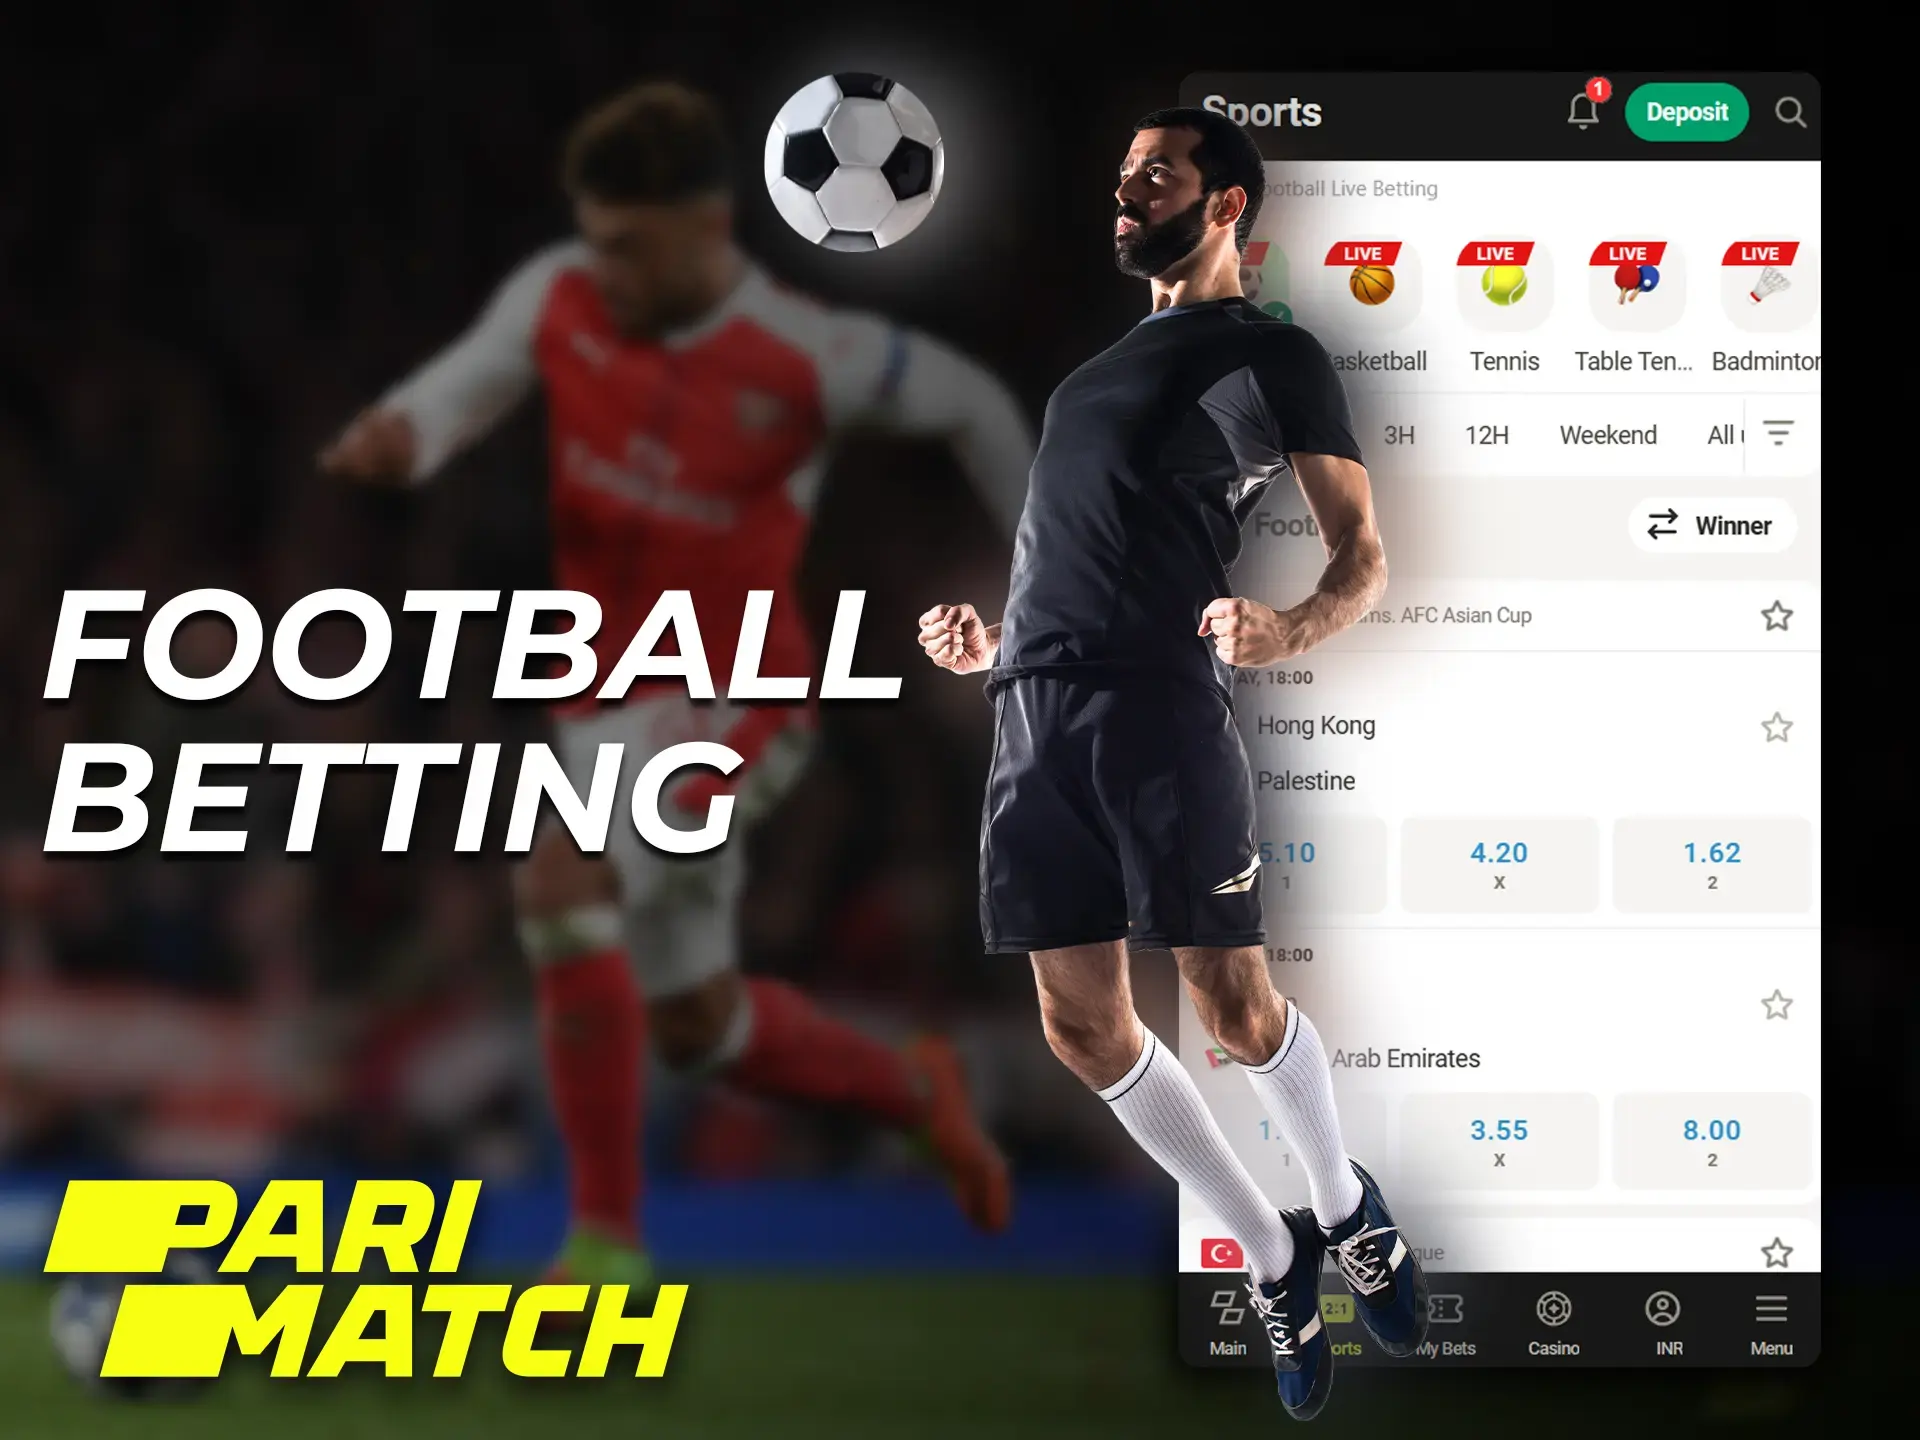 Betting on football and football leagues is available on the Parimatch app.